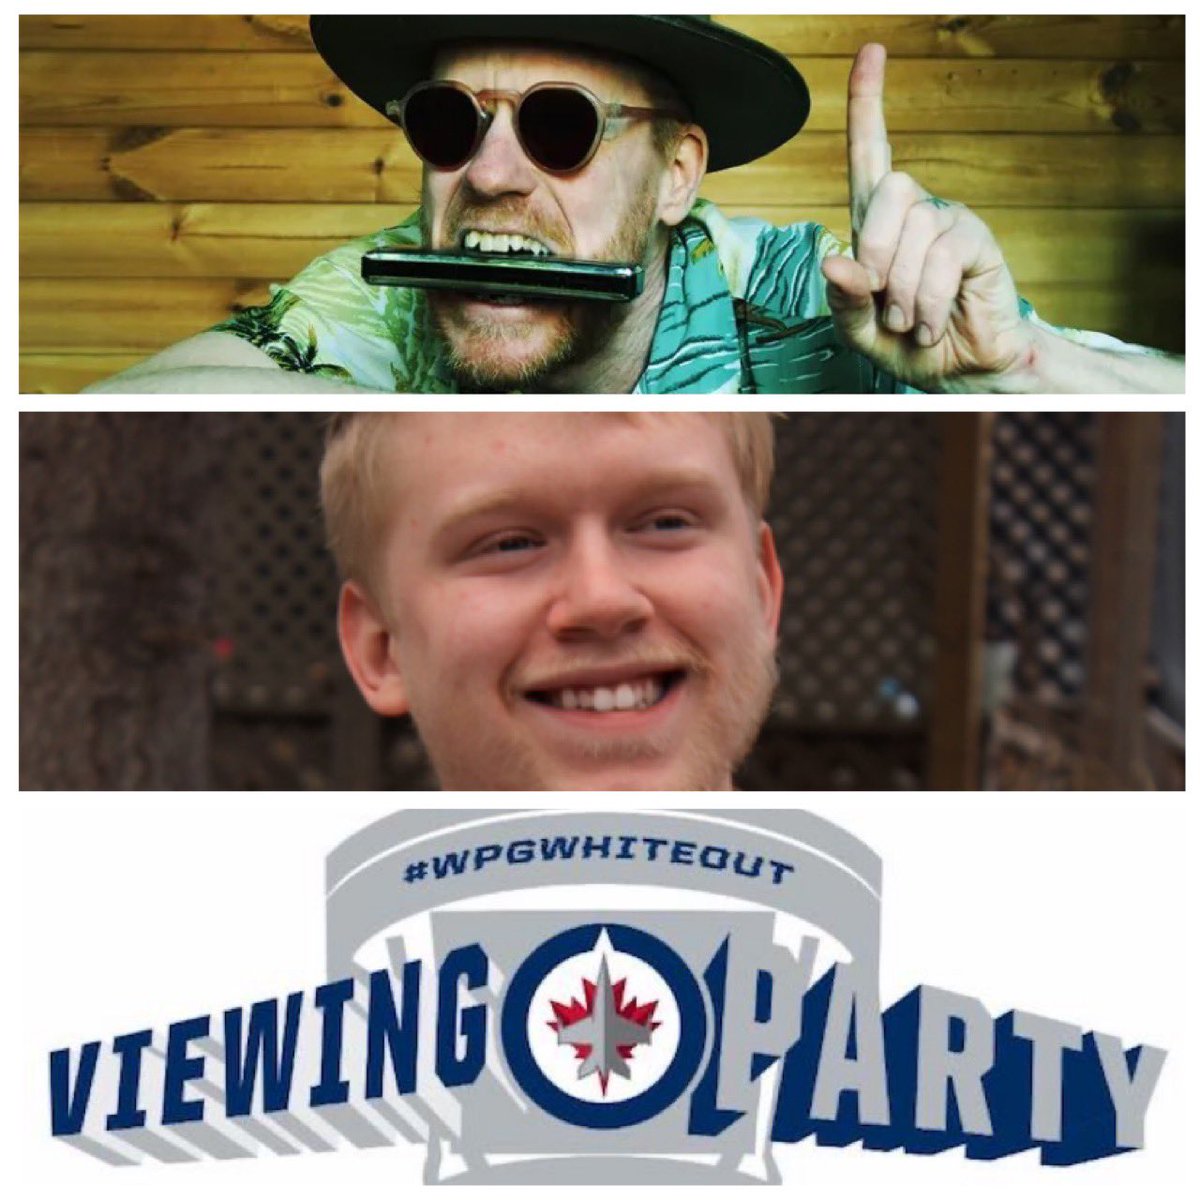 Friday we welcome @thesonofdave (sold out!). Saturday is Patrick Coyston Trio (just a handful of tix left!). Sunday, come cheer on the Jets in Game 4 against the Avalanche, with all our usual Jets game specials. Wear white! #gimli #publife #livemusic #MBlive #stanleycupplayoffs